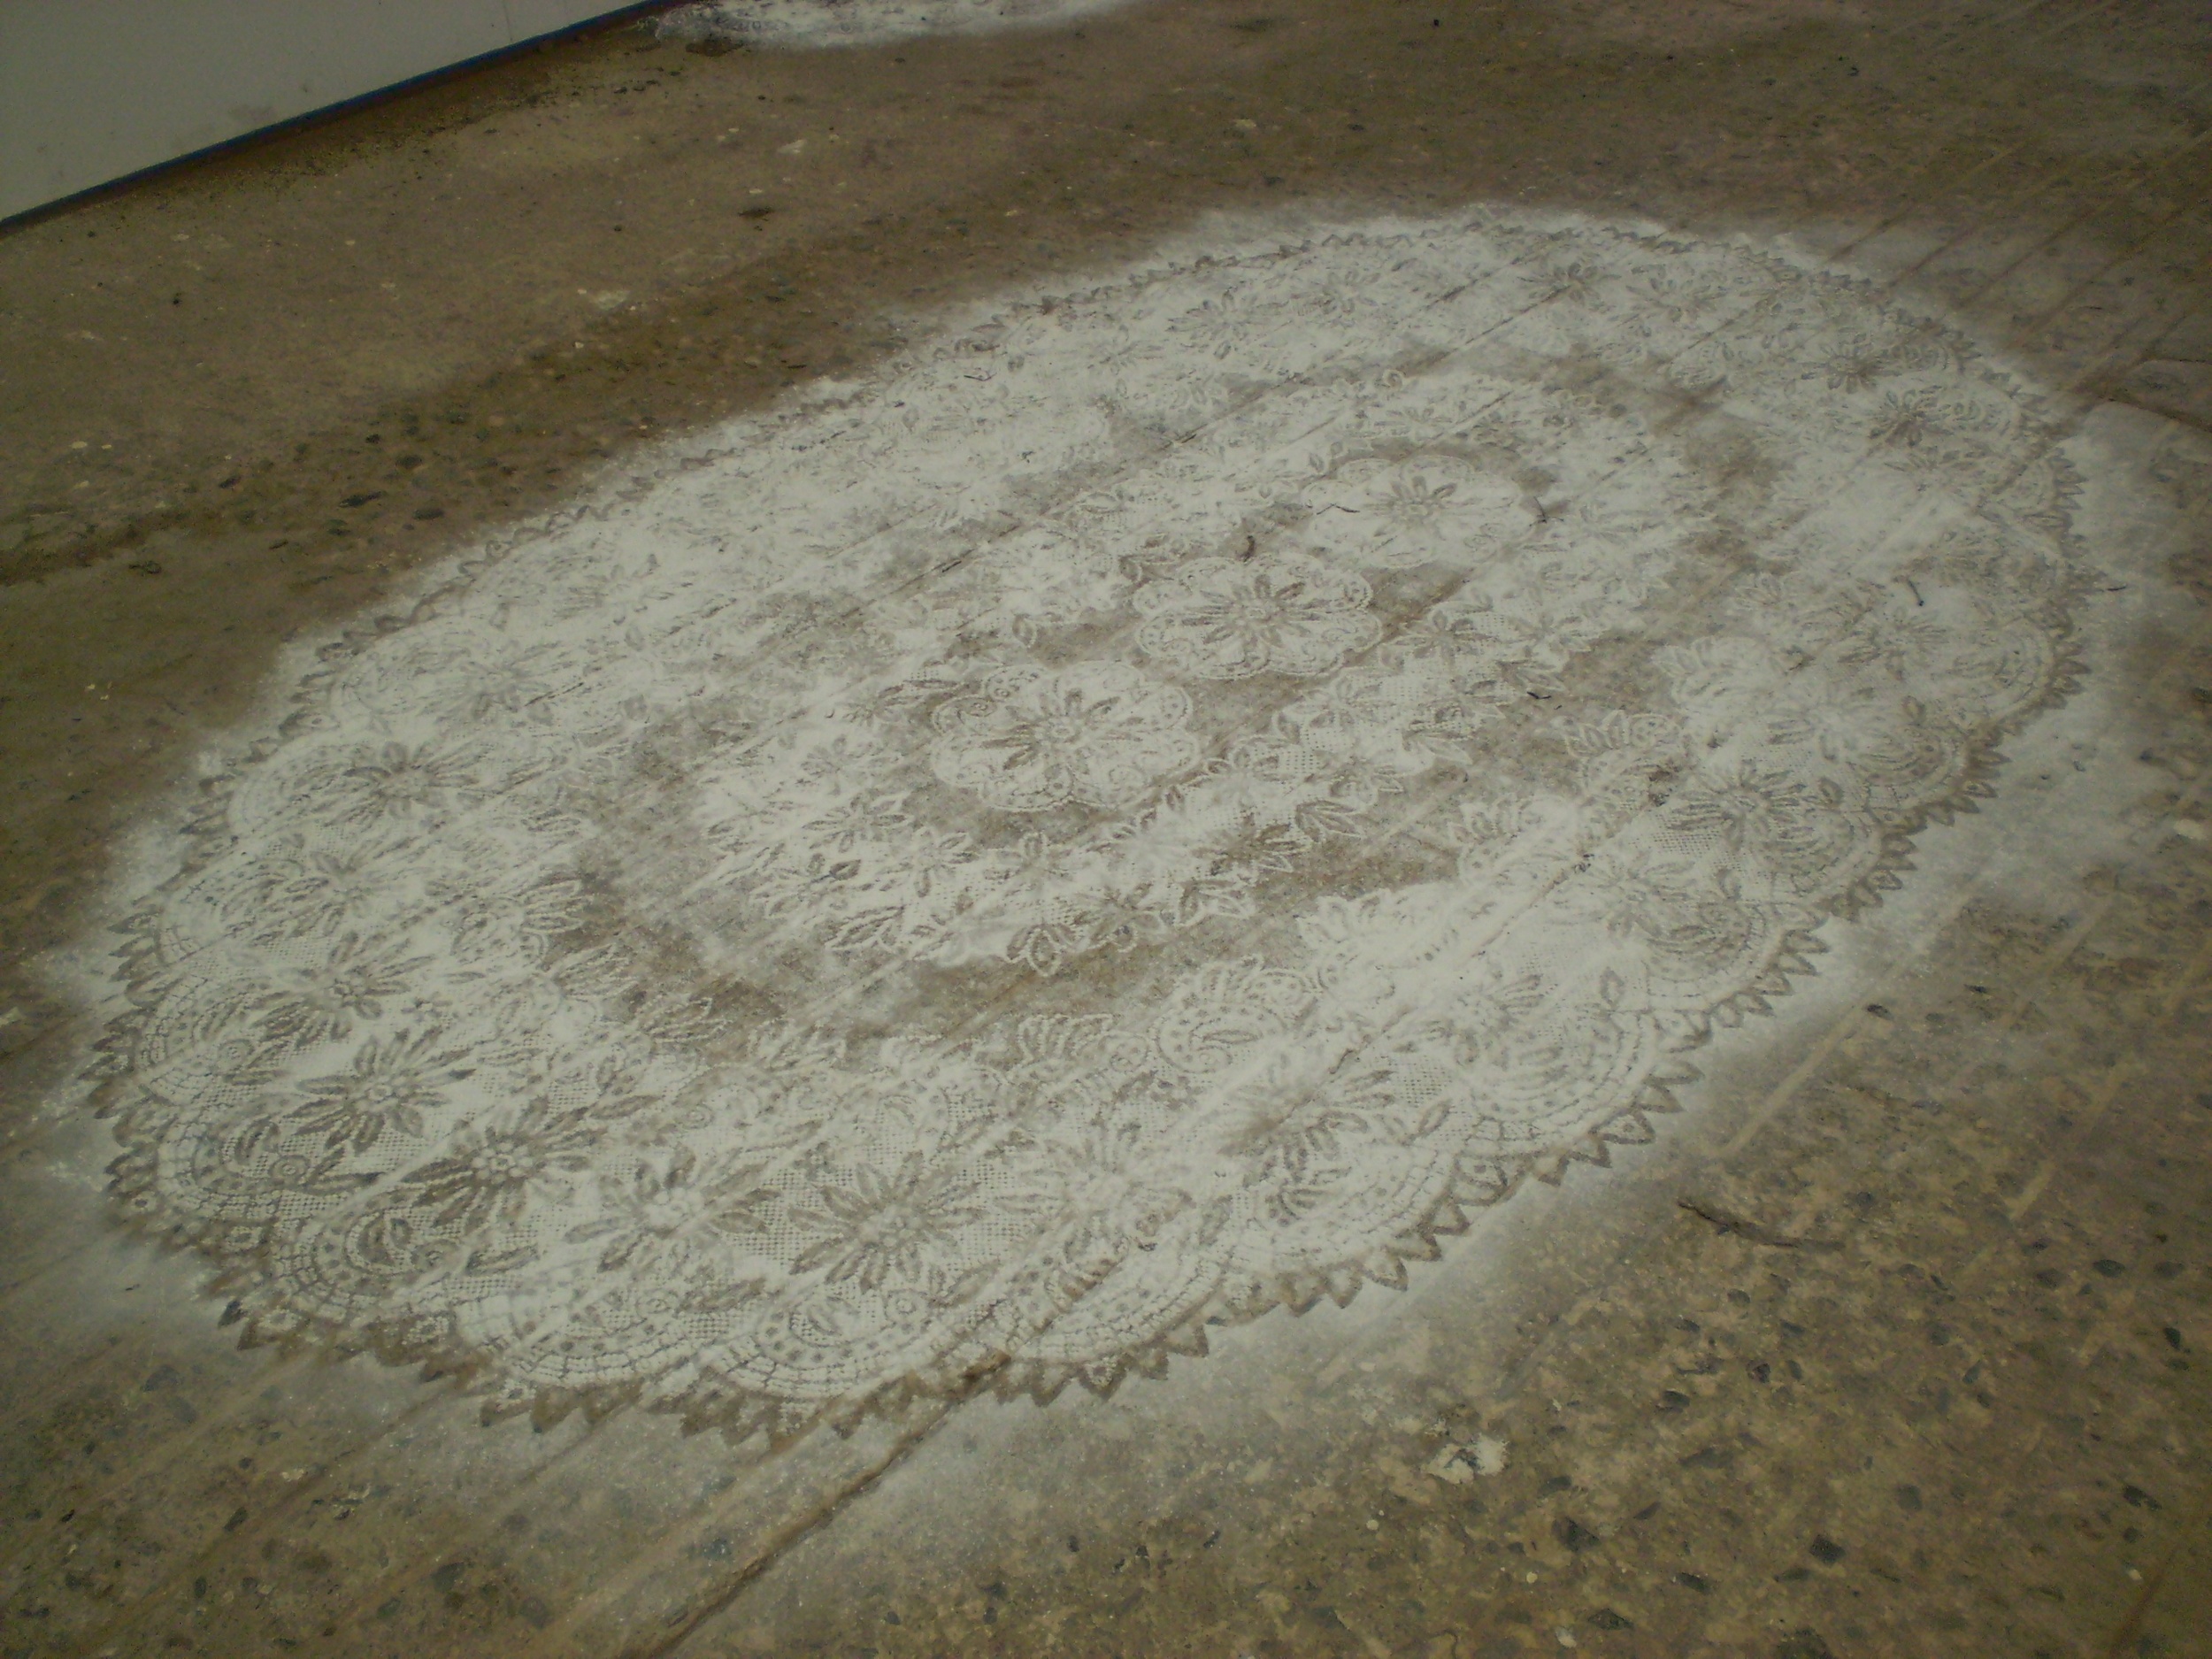   Installation in Baby Powder , 2012 Sifted baby powder on gallery floor, 36x68 inches 